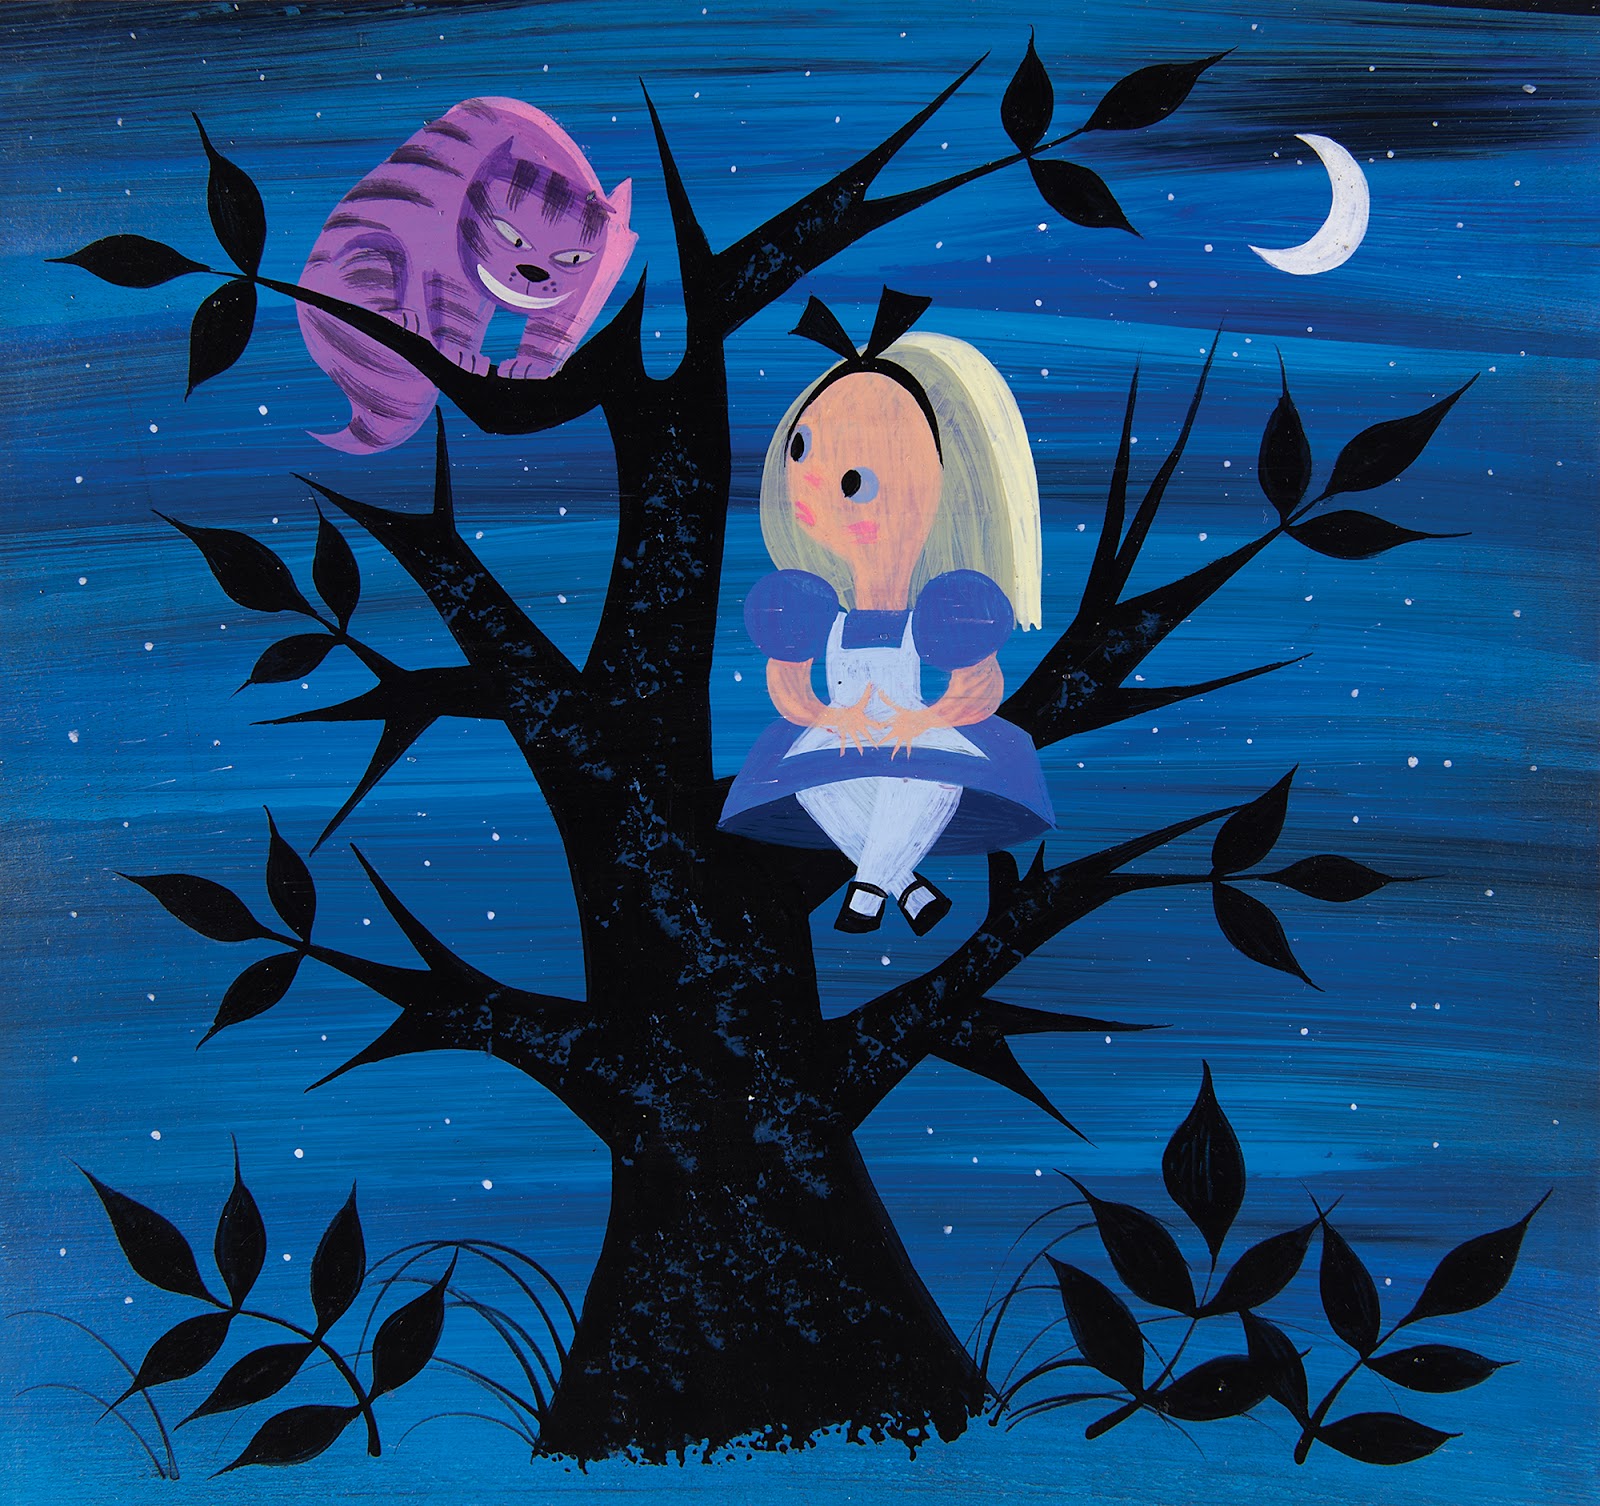 Original concept painting of Alice and the Cheshire Cat in the moonlight from 1951’s Alice in Wonderland.